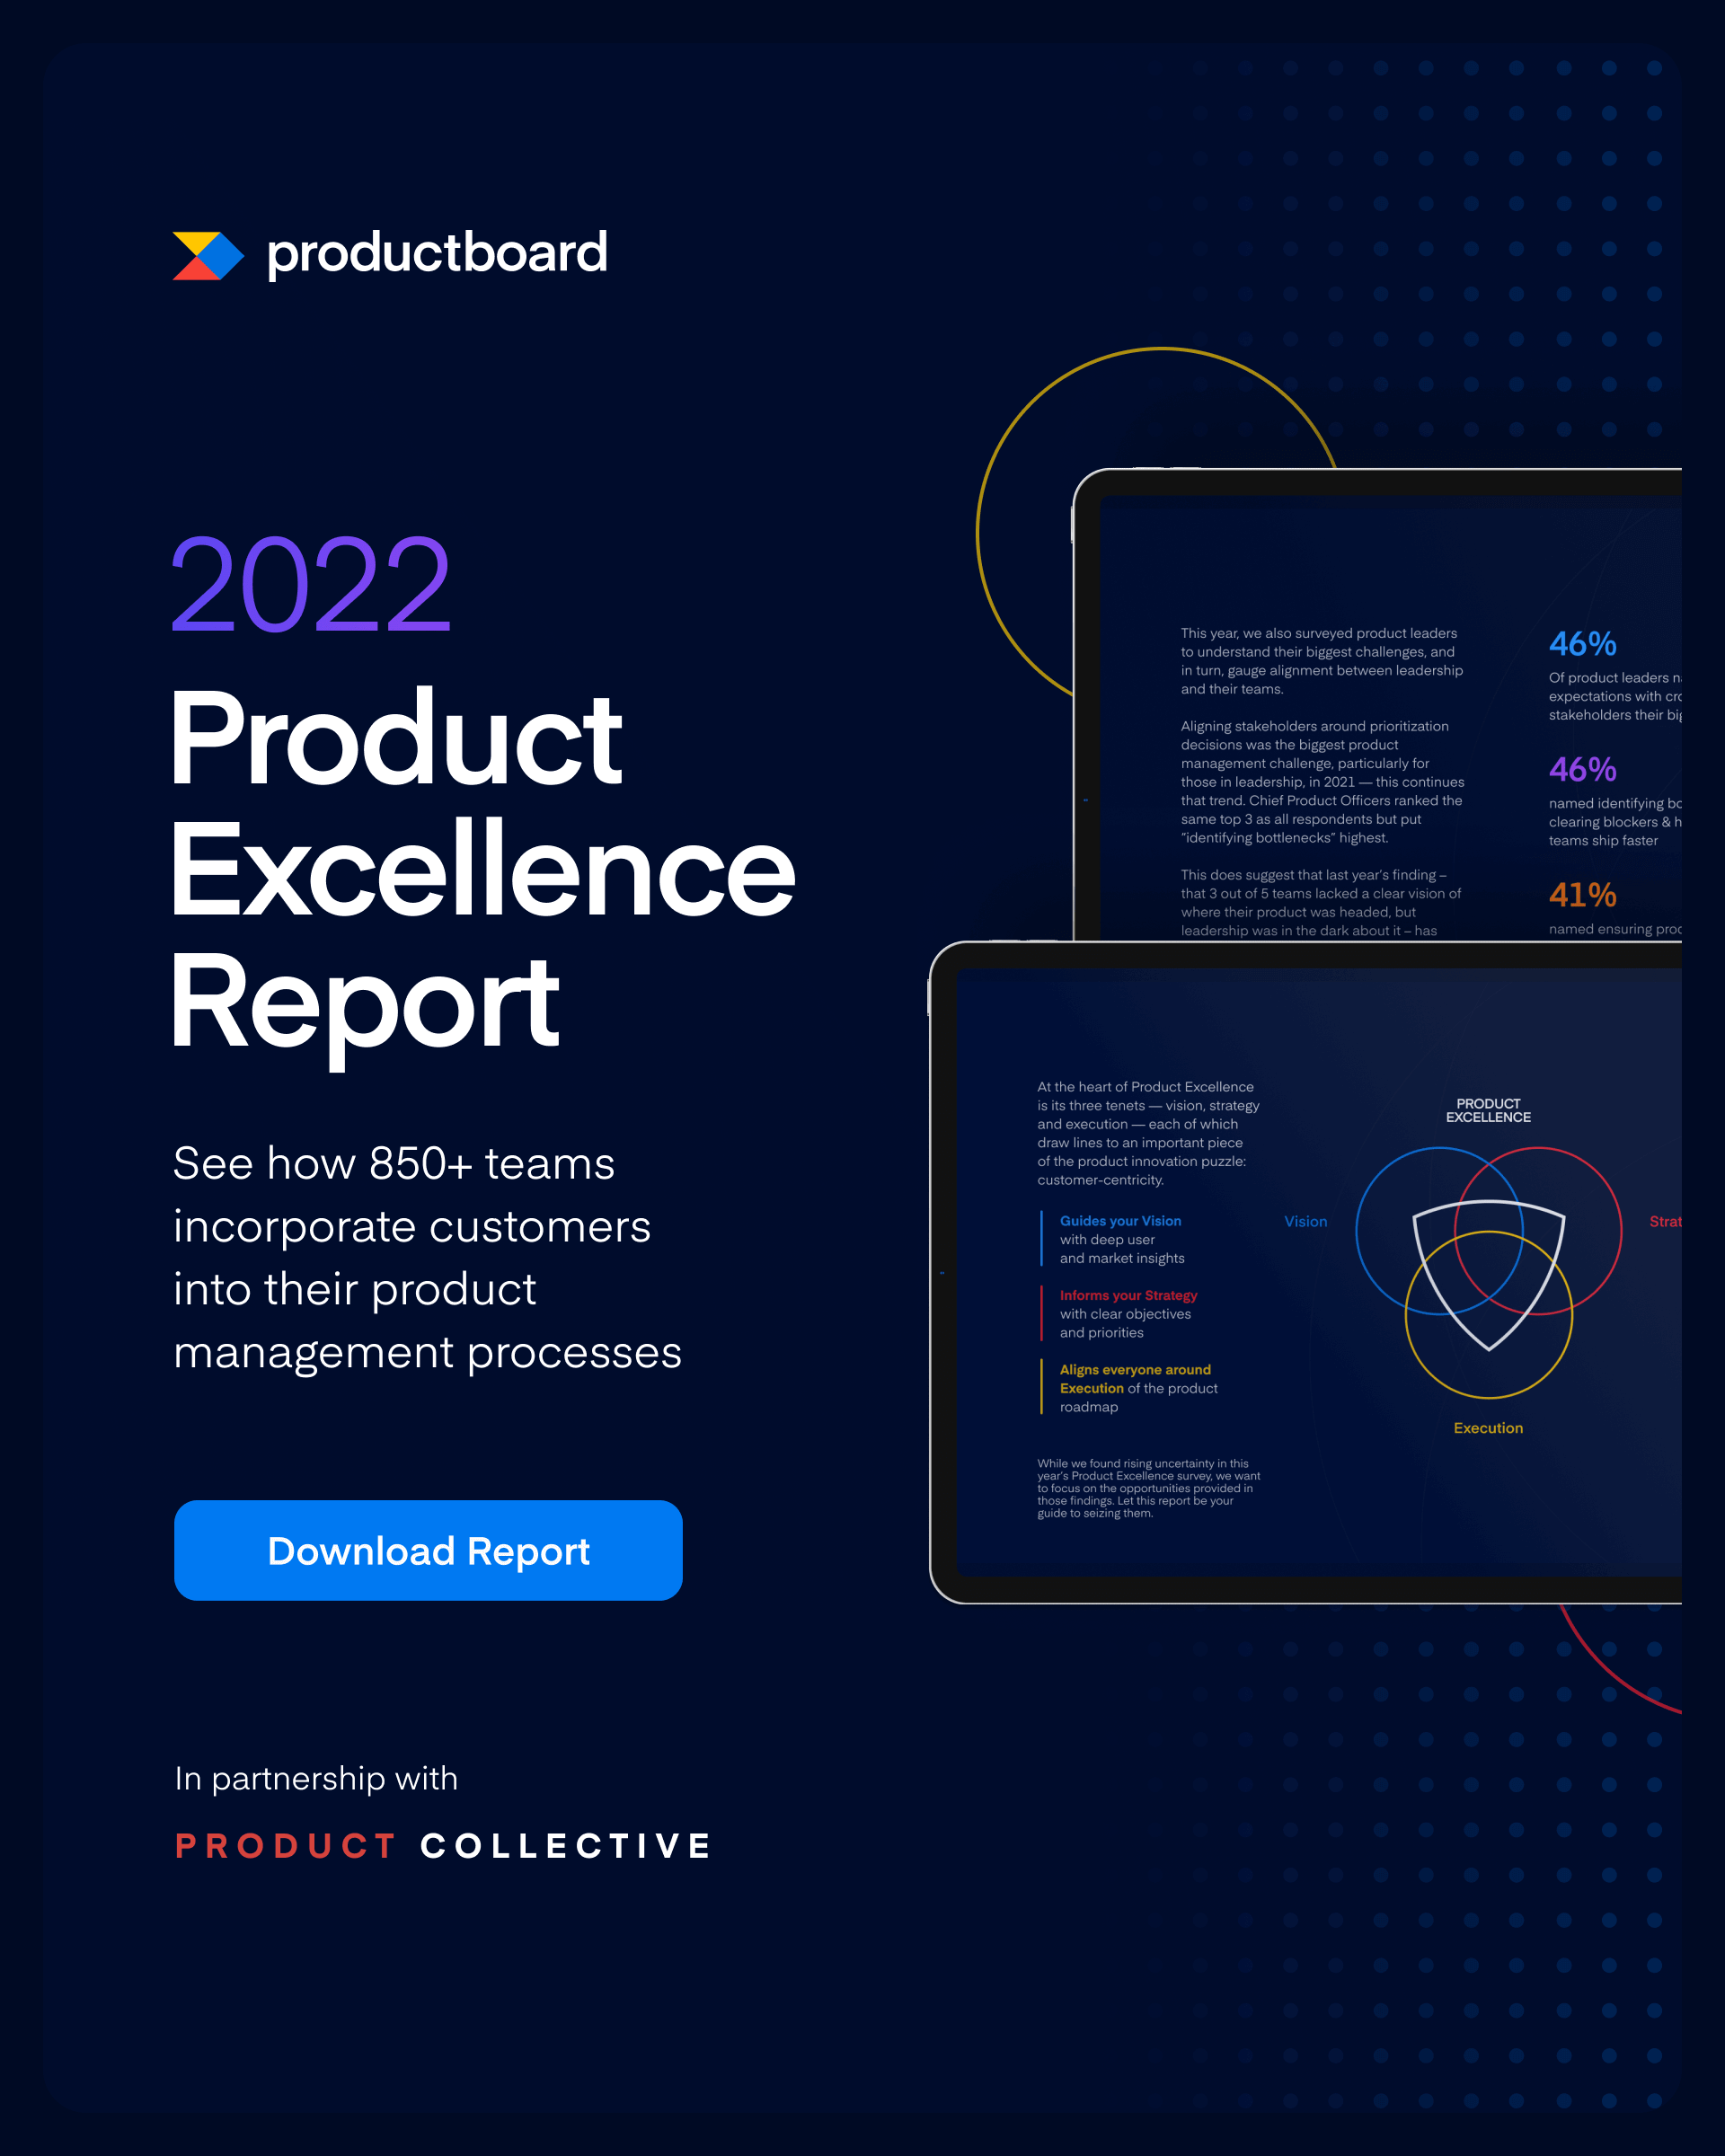 The 2022 Product Excellence Report